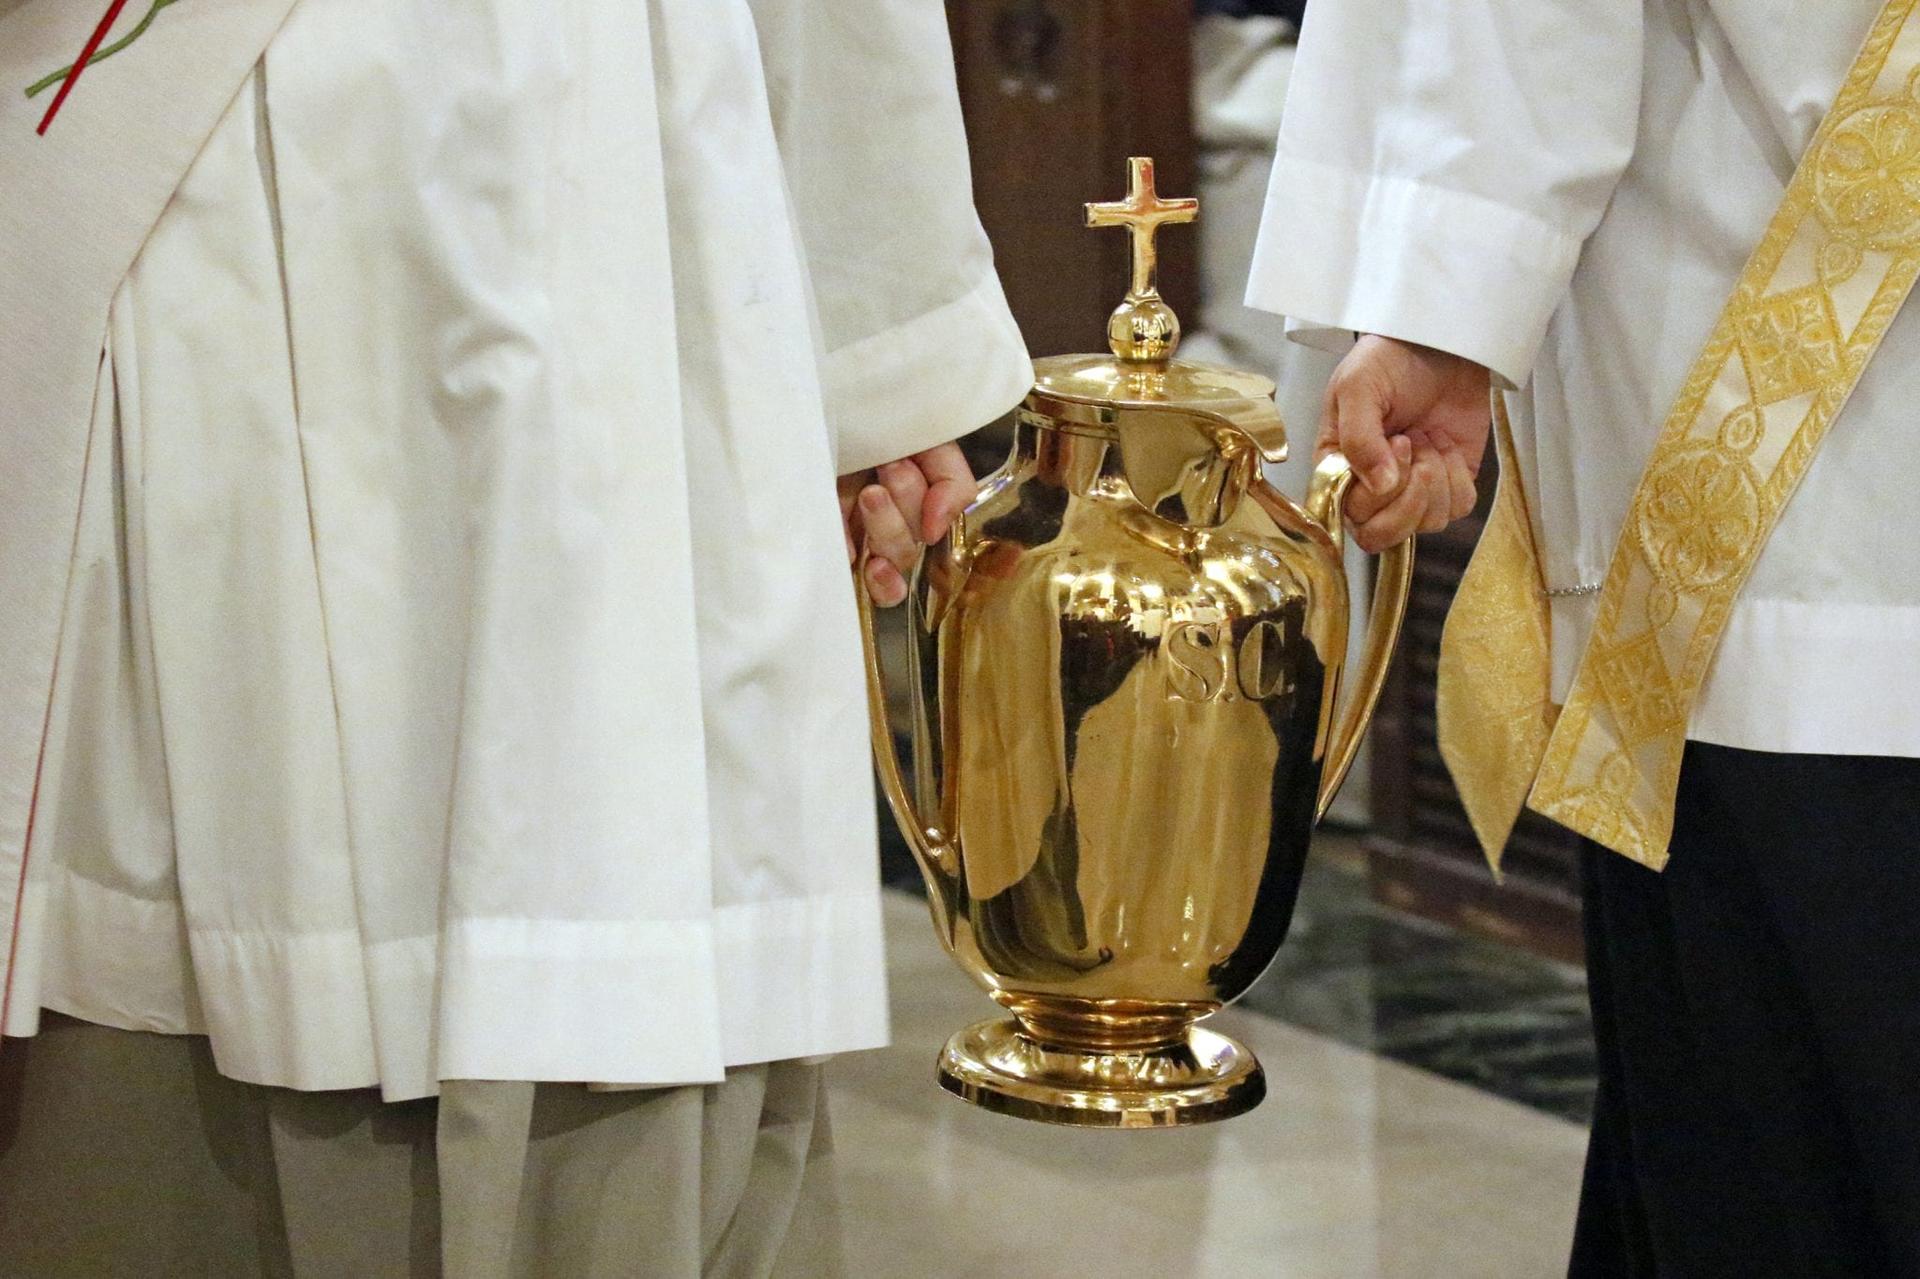 At chrism Masses, bishops stress need for unity among all the baptized